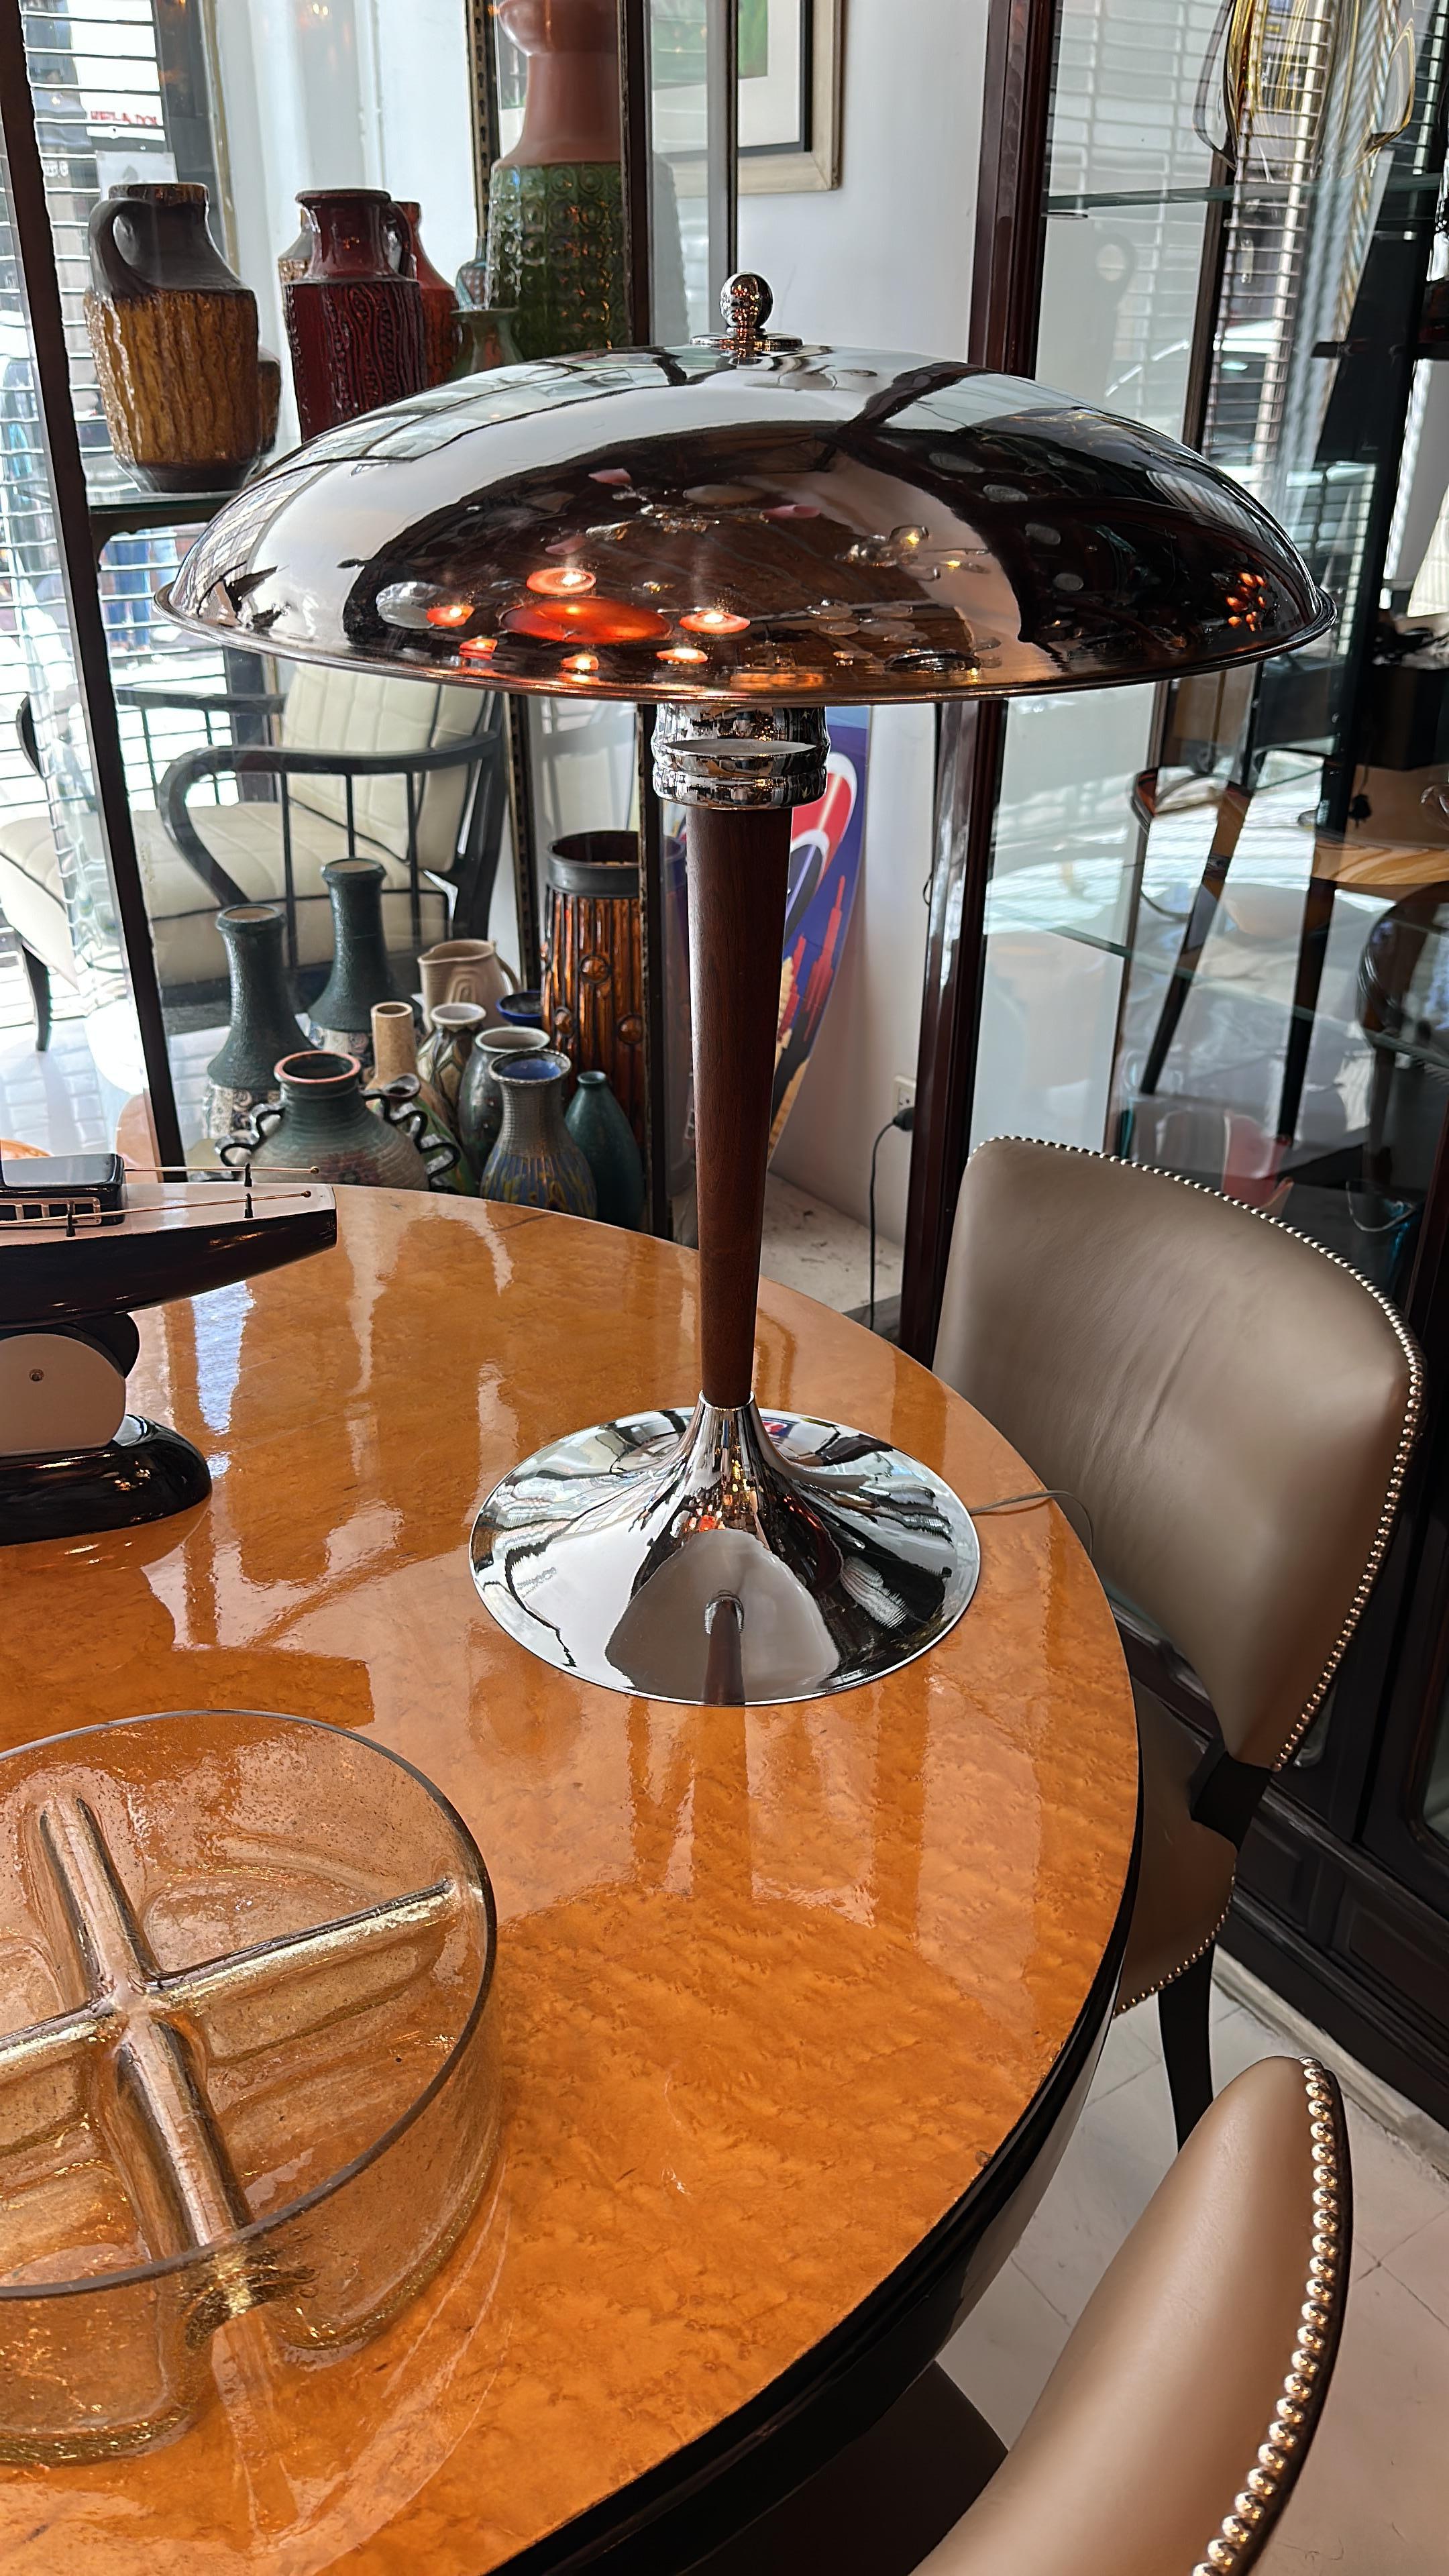 Desk lamp Art deco.
Materia: chromed and wood
Style: Art Deco
Country: German
To take care of your property and the lives of our customers, the new wiring has been done.
If you want to live in the golden years, this is the Desk lamp that your